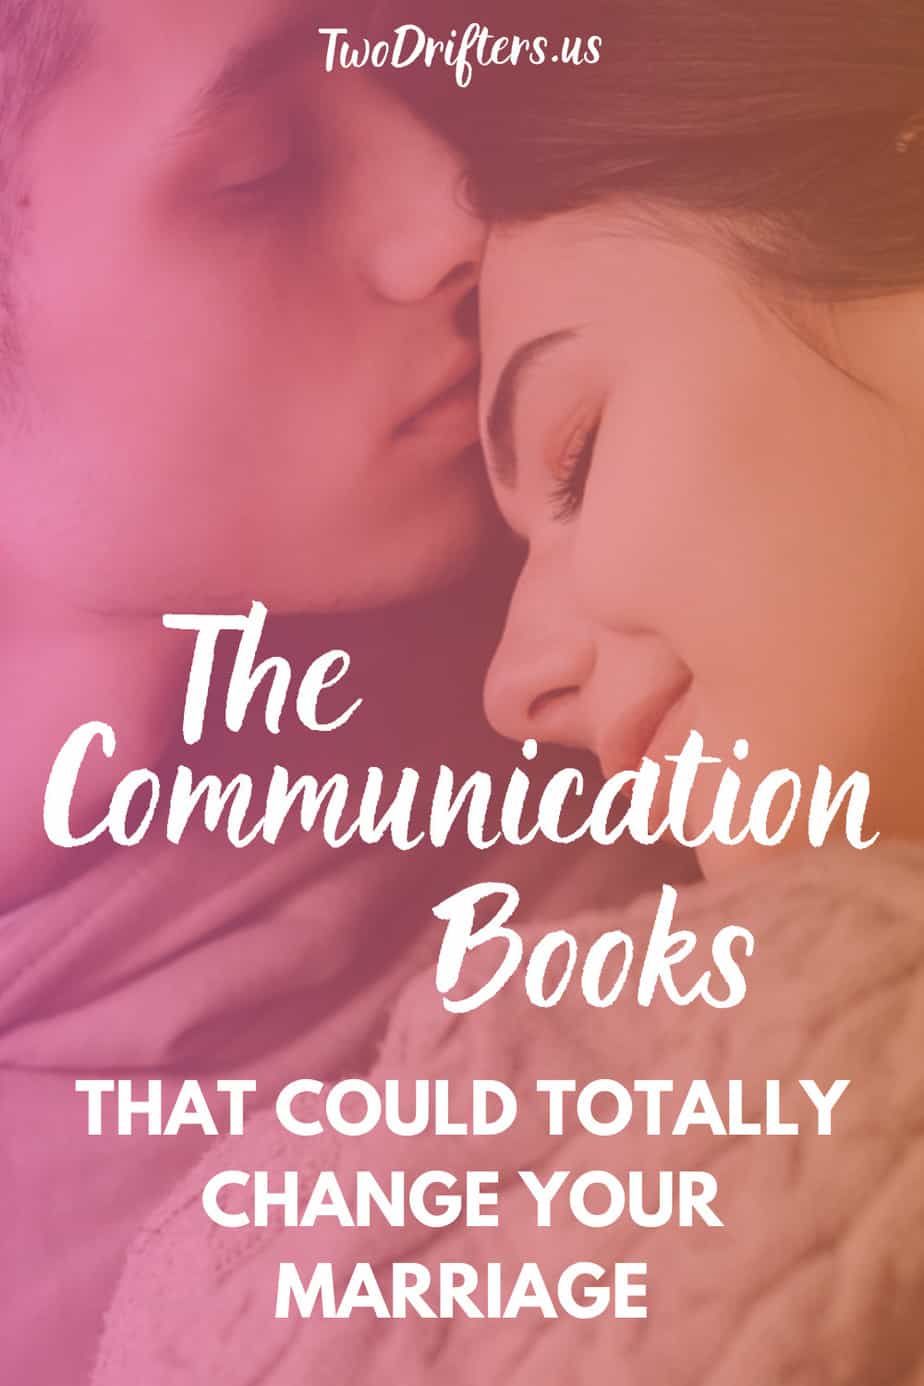 Pinterest social share image that says "The Communication Books That Could Totally Change Your Marriage."